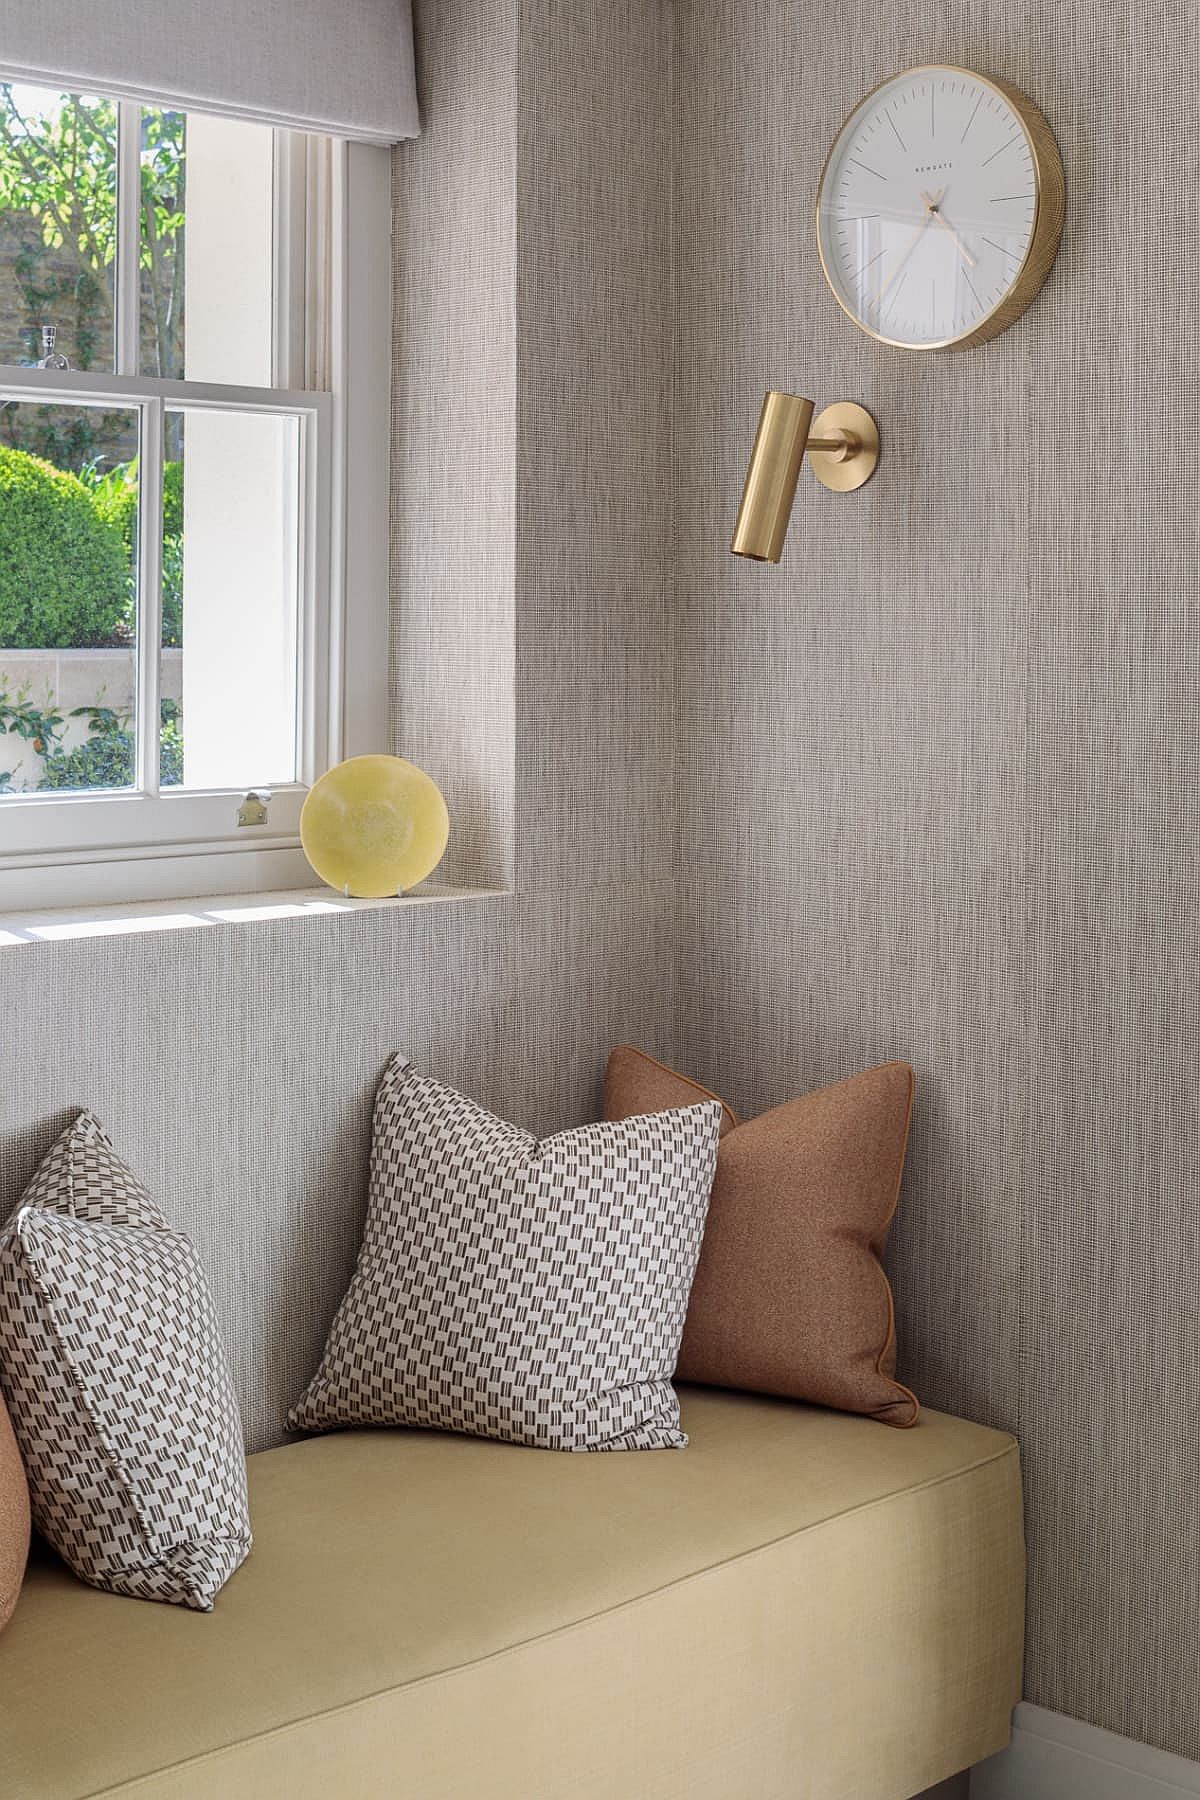 Comfy window seat with lighting that feels cozy